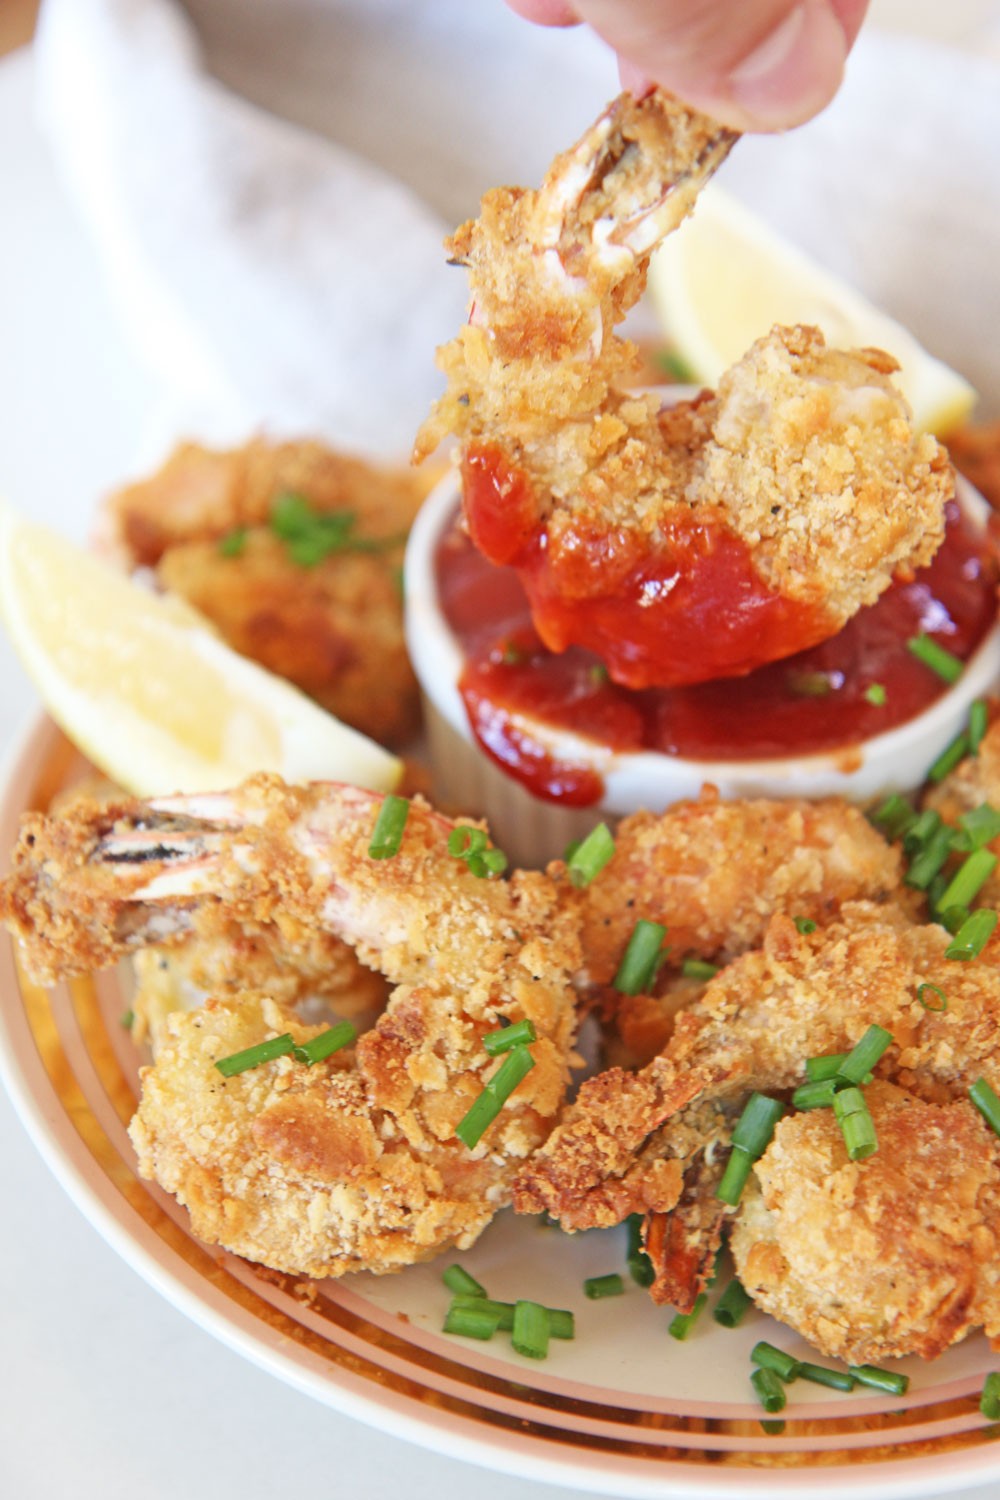 The Best Oven Fried Shrimp Recipe. Easy healthy version of fried shrimp. coat with flour, egg, and Ritz crackers. Then spray with avocado oil and bakes 10 minutes. www.ChopHappy.com #friedshrimp #ovenfriedshrimp